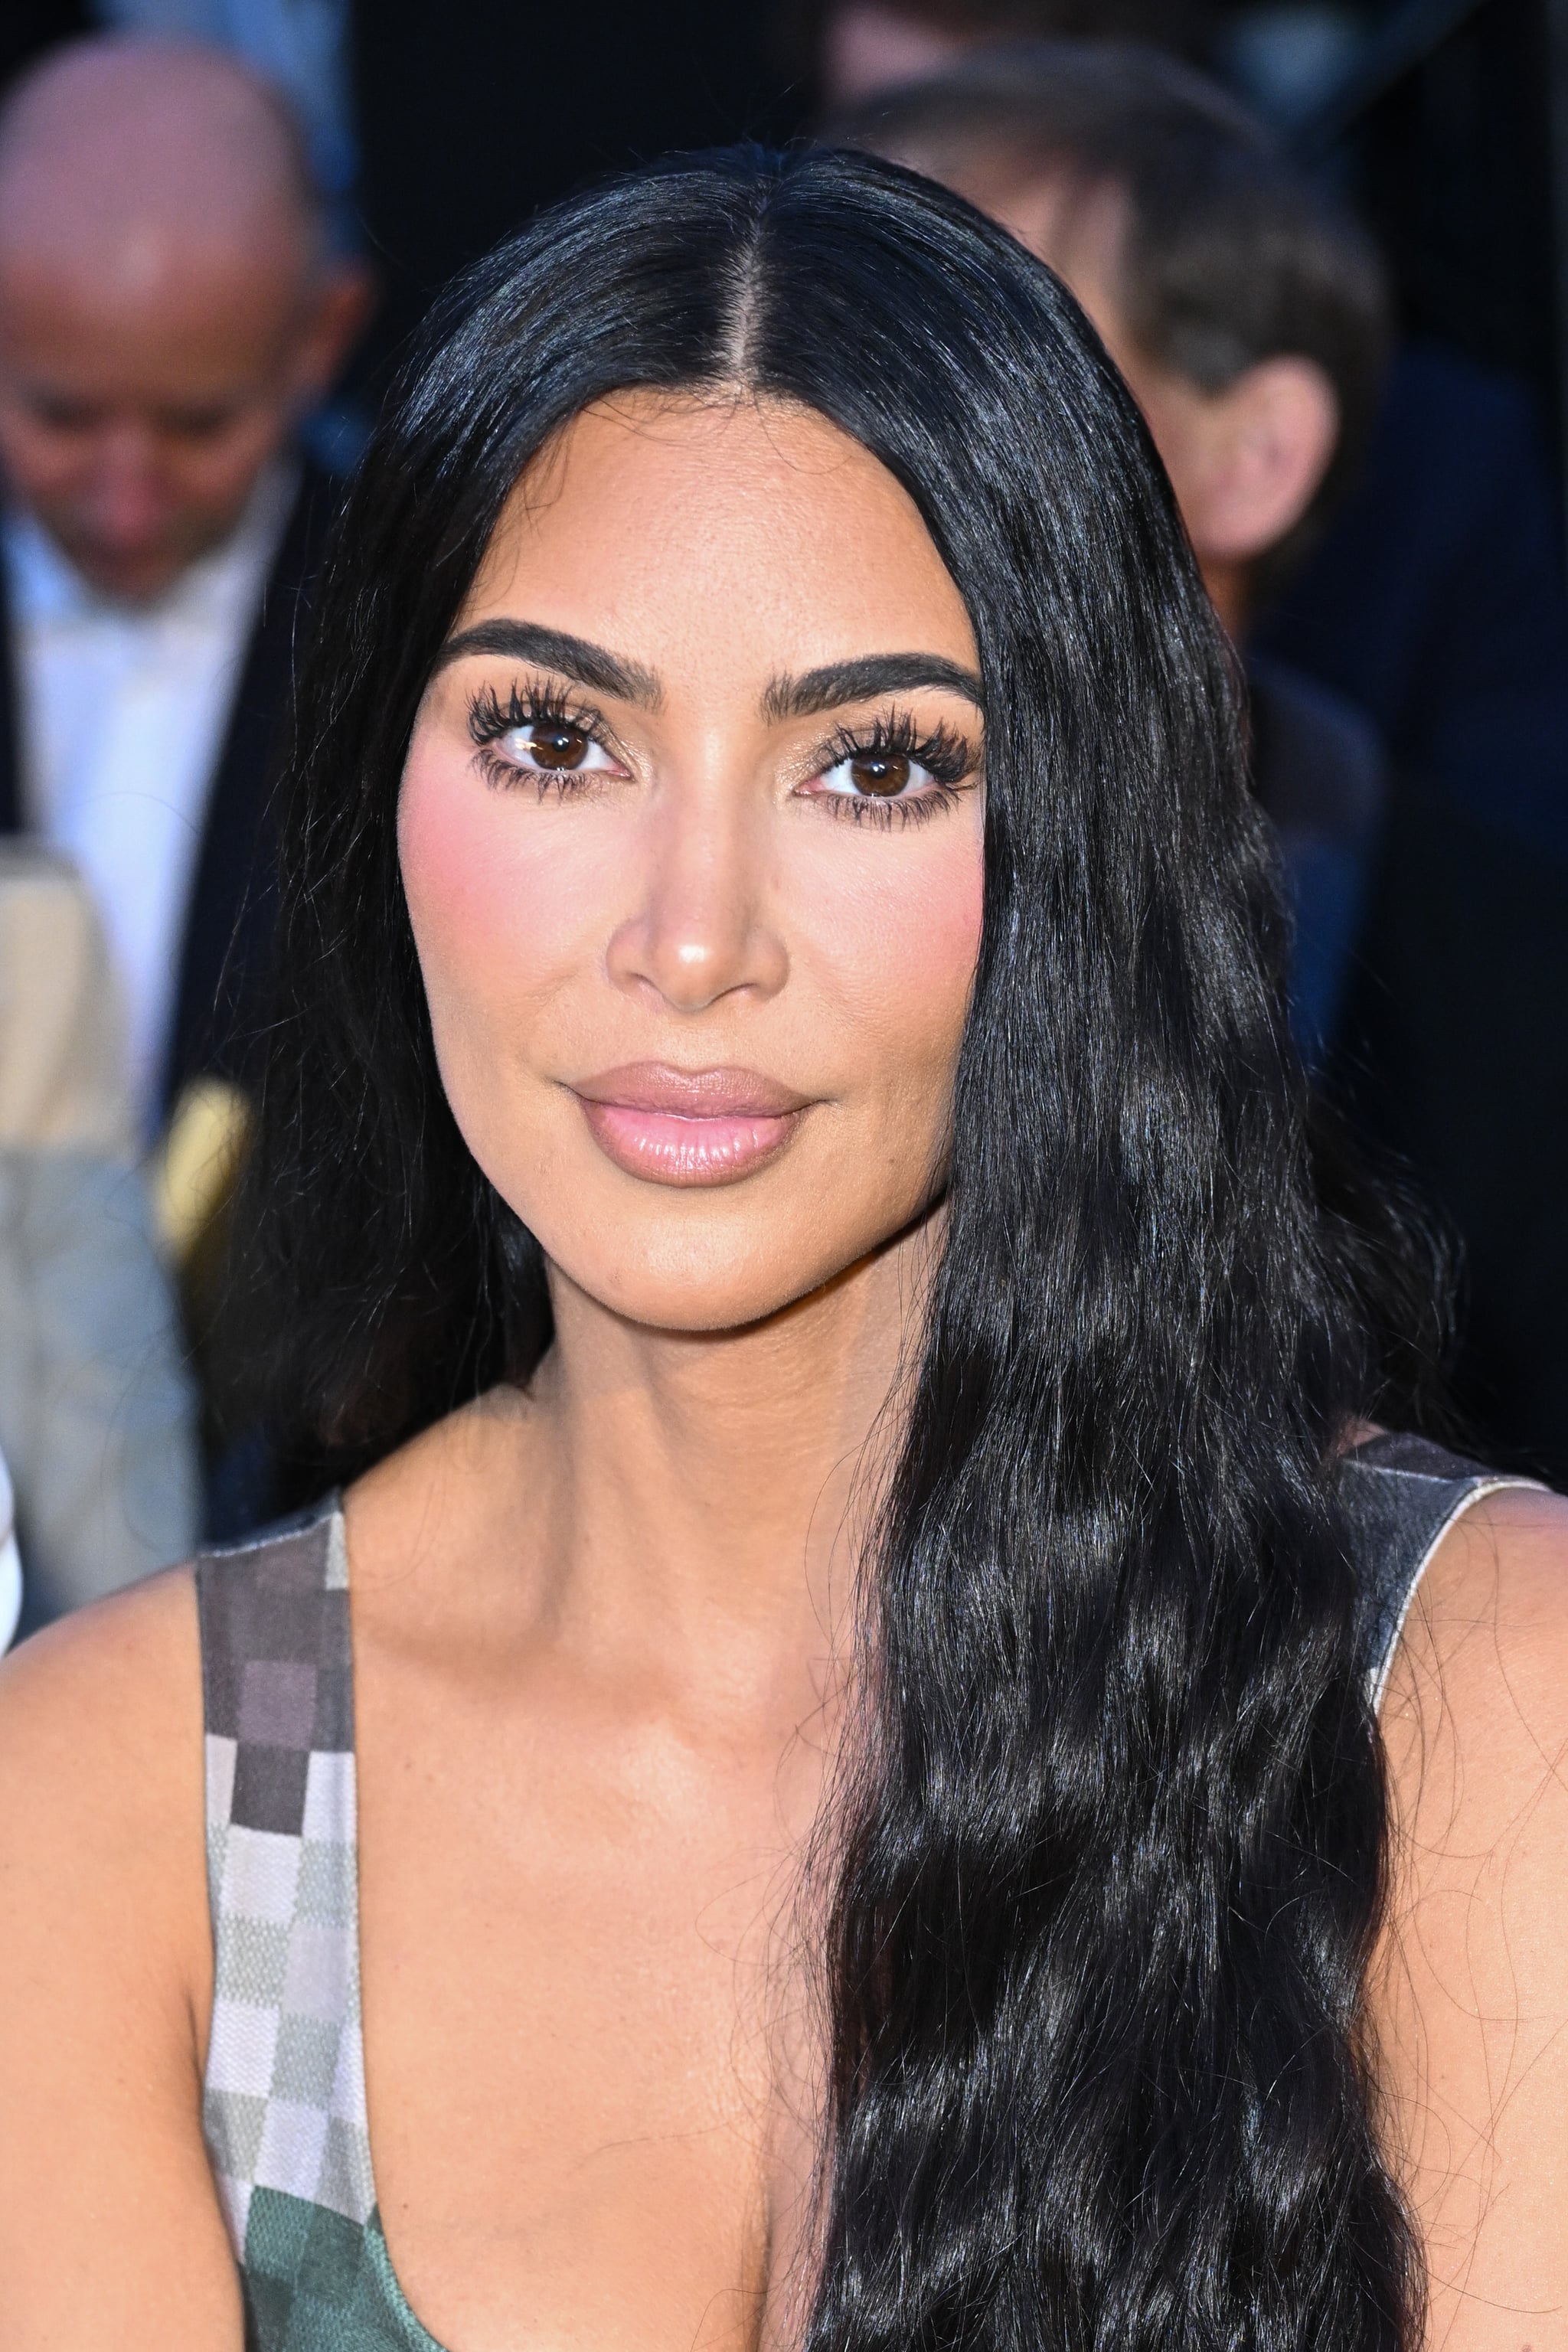 PARIS, FRANCE - JUNE 20: (EDITORIAL USE ONLY - For Non-Editorial use please seek approval from Fashion House) Kim Kardashian attends the Louis Vuitton Menswear Spring/Summer 2024 show as part of Paris Fashion Week  on June 20, 2023 in Paris, France. (Photo by Stephane Cardinale - Corbis/Corbis via Getty Images)